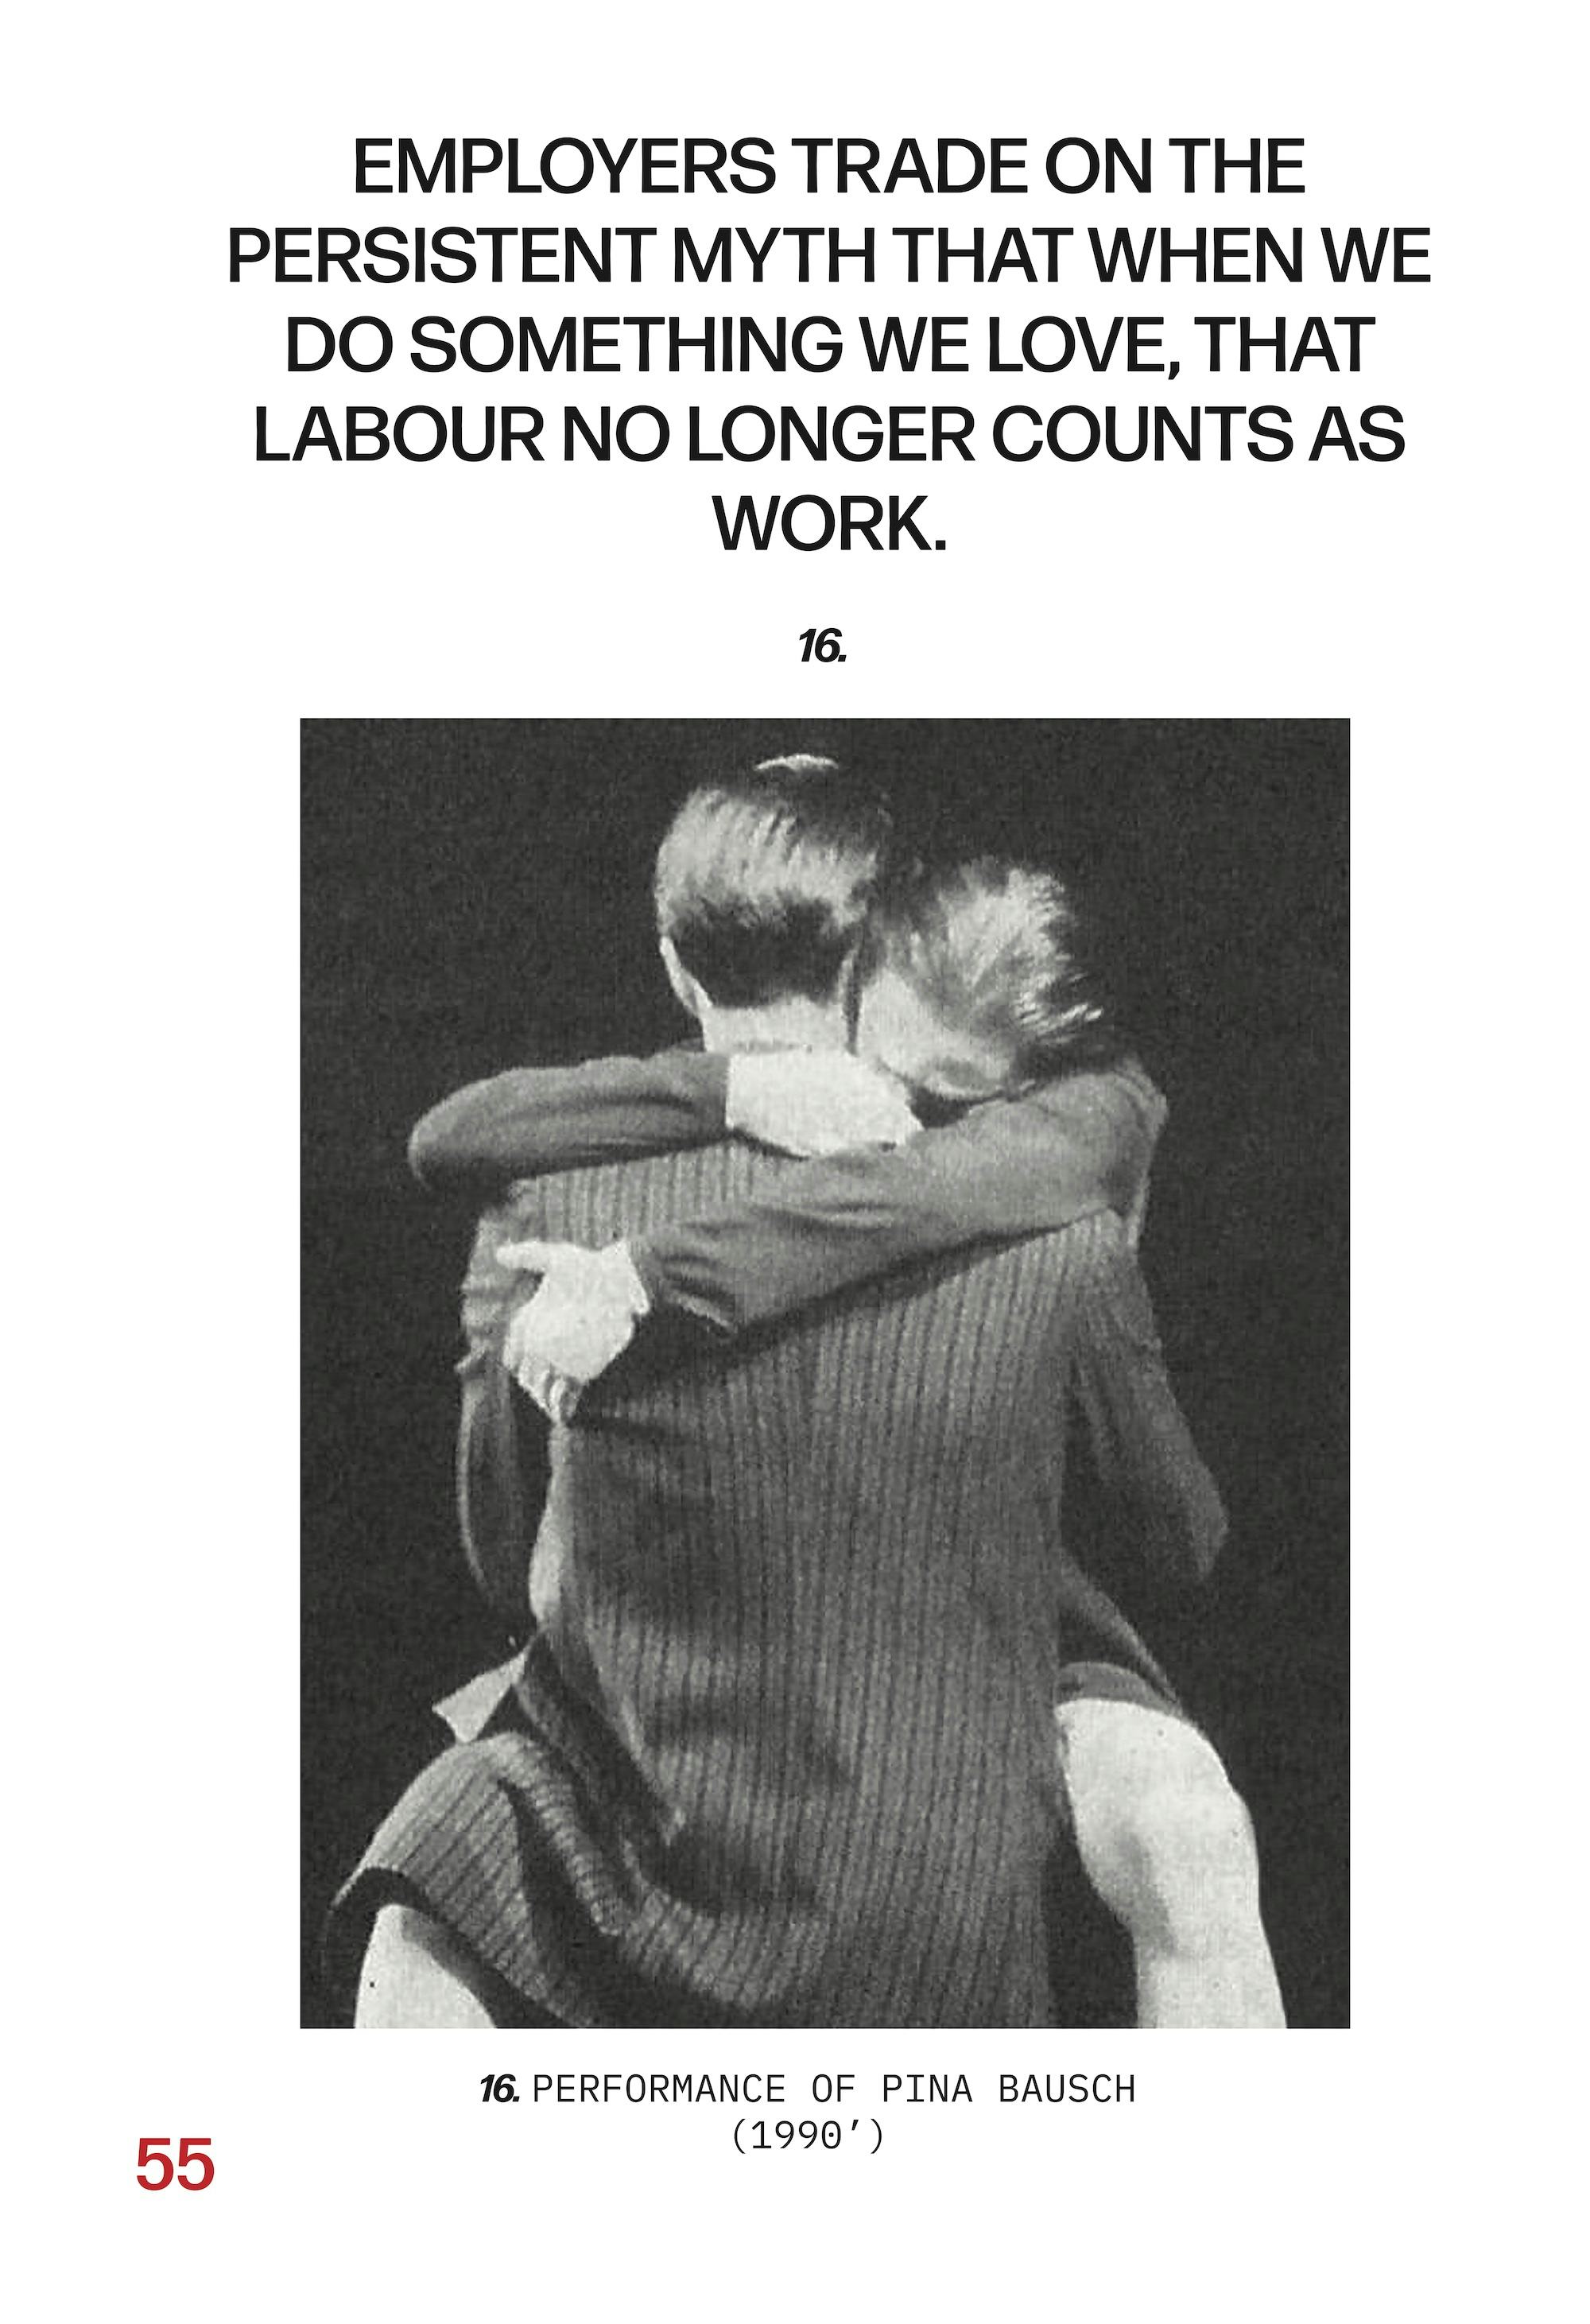 Black and white poster with an still from a performance by Pina Bausch, accompanied by a critical text in all caps about the labour. 